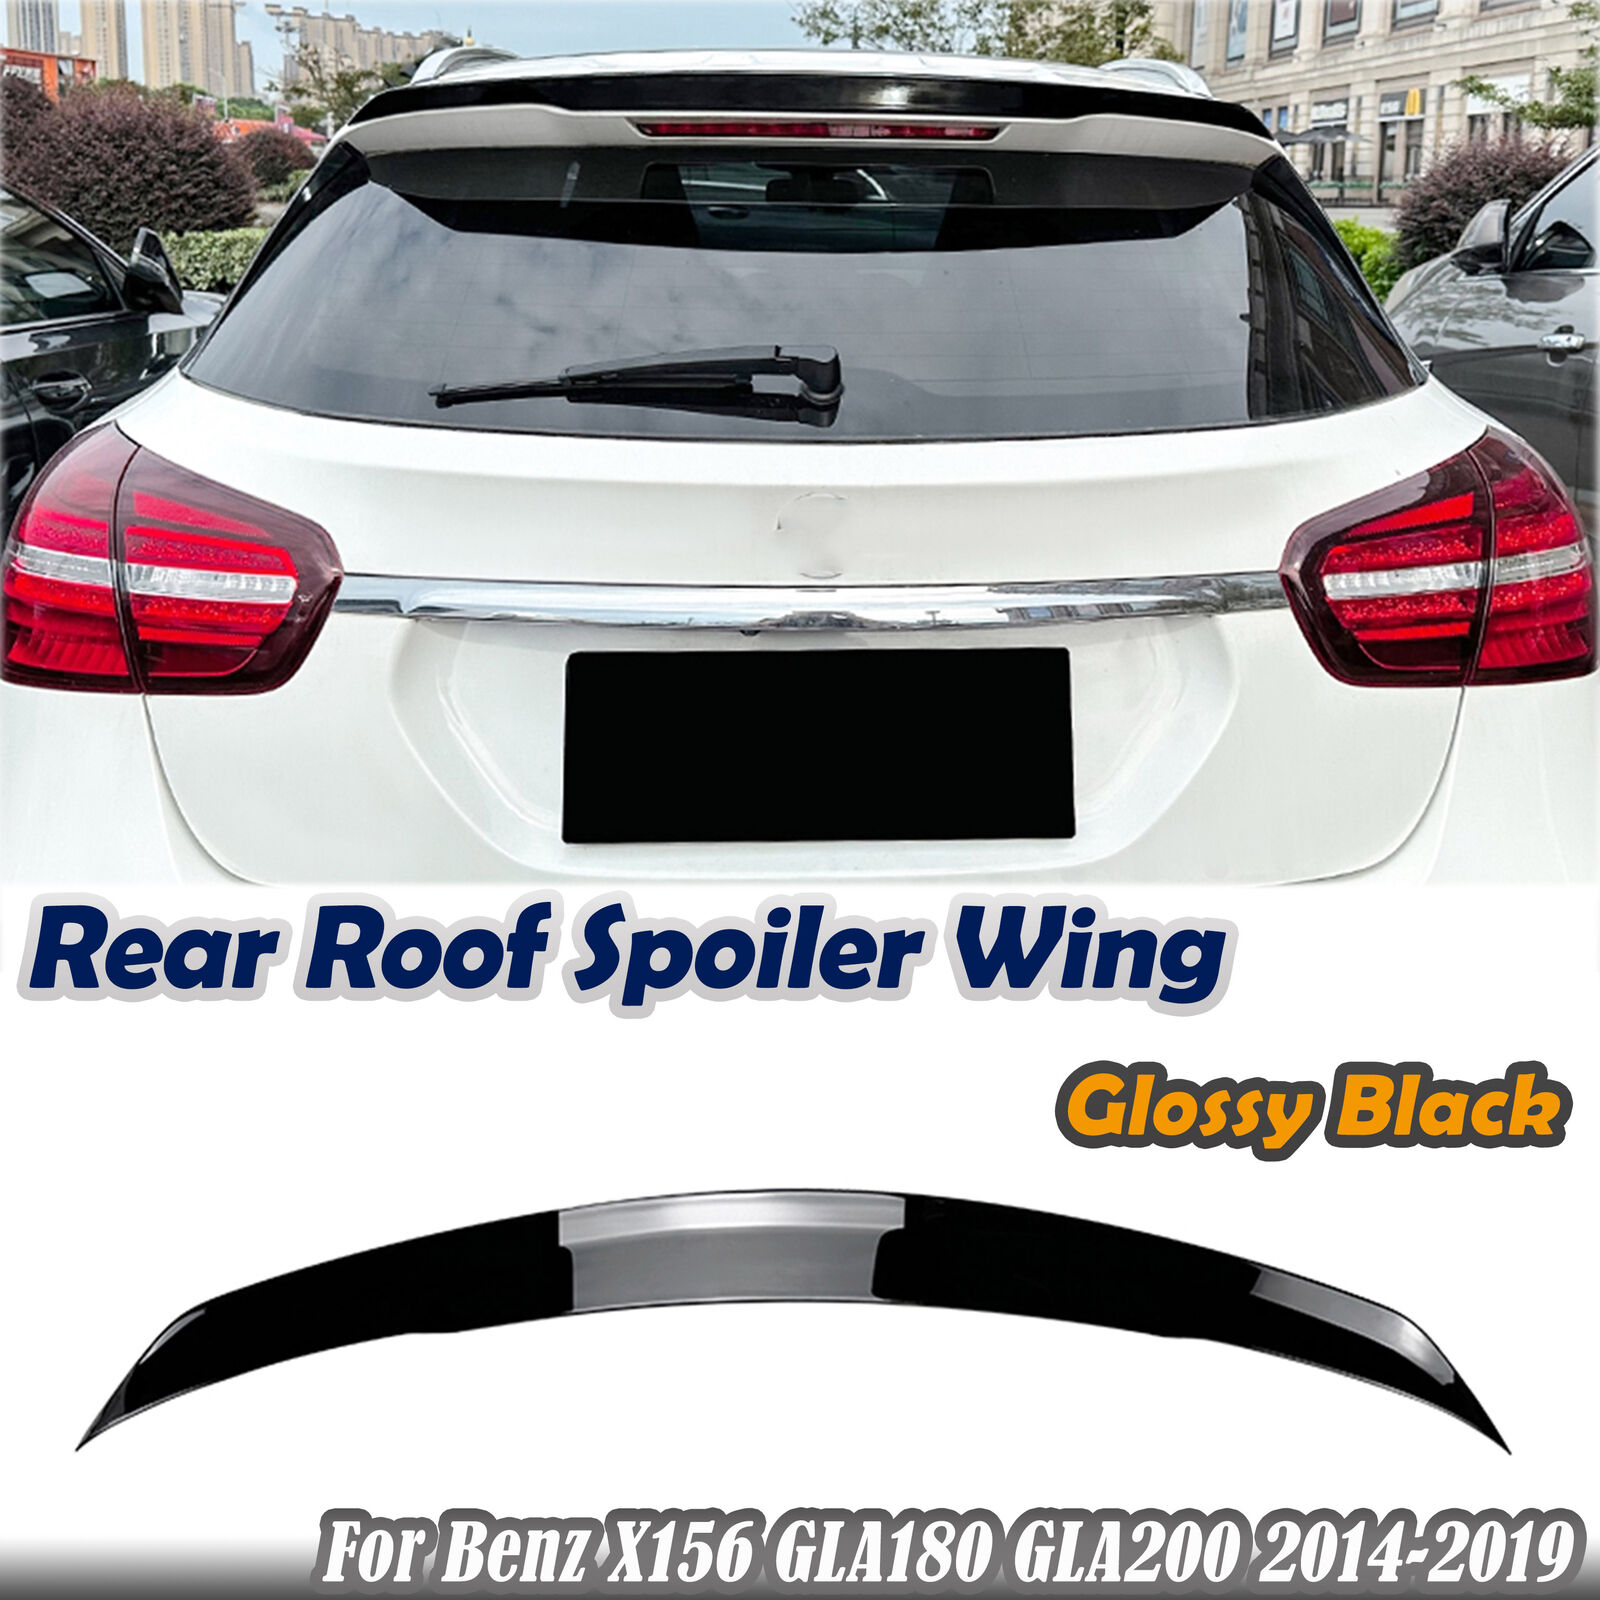 Rear Bumper Trunk Roof Spoiler Wing For Benz X156 GLA250 GLA45 AMG 2014-19 Black